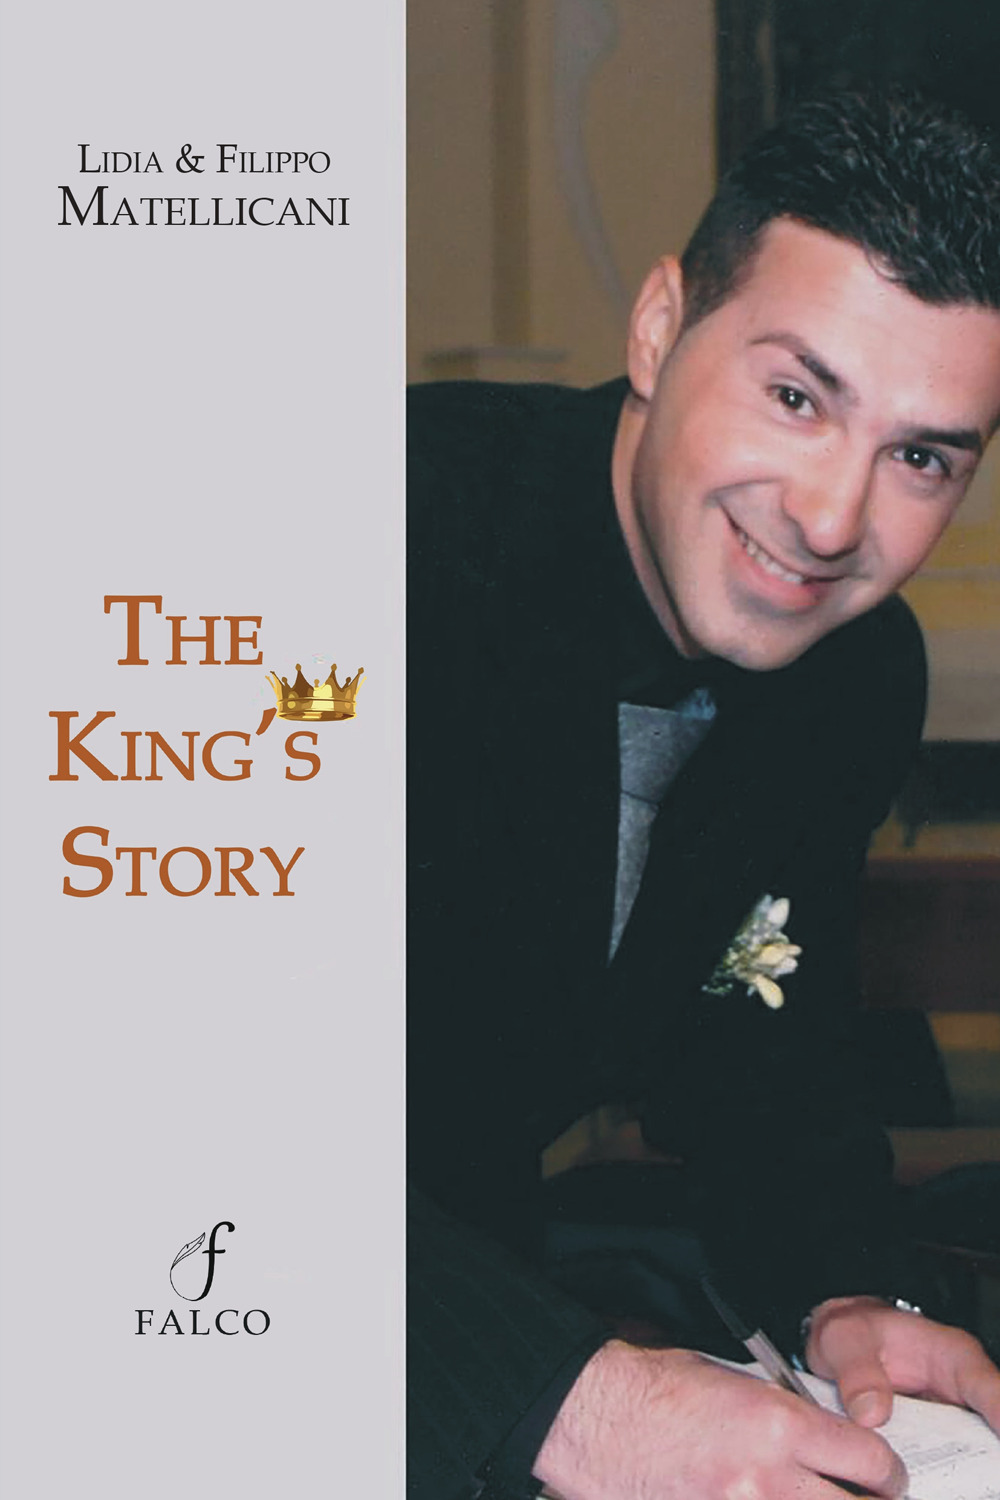 The King's Story